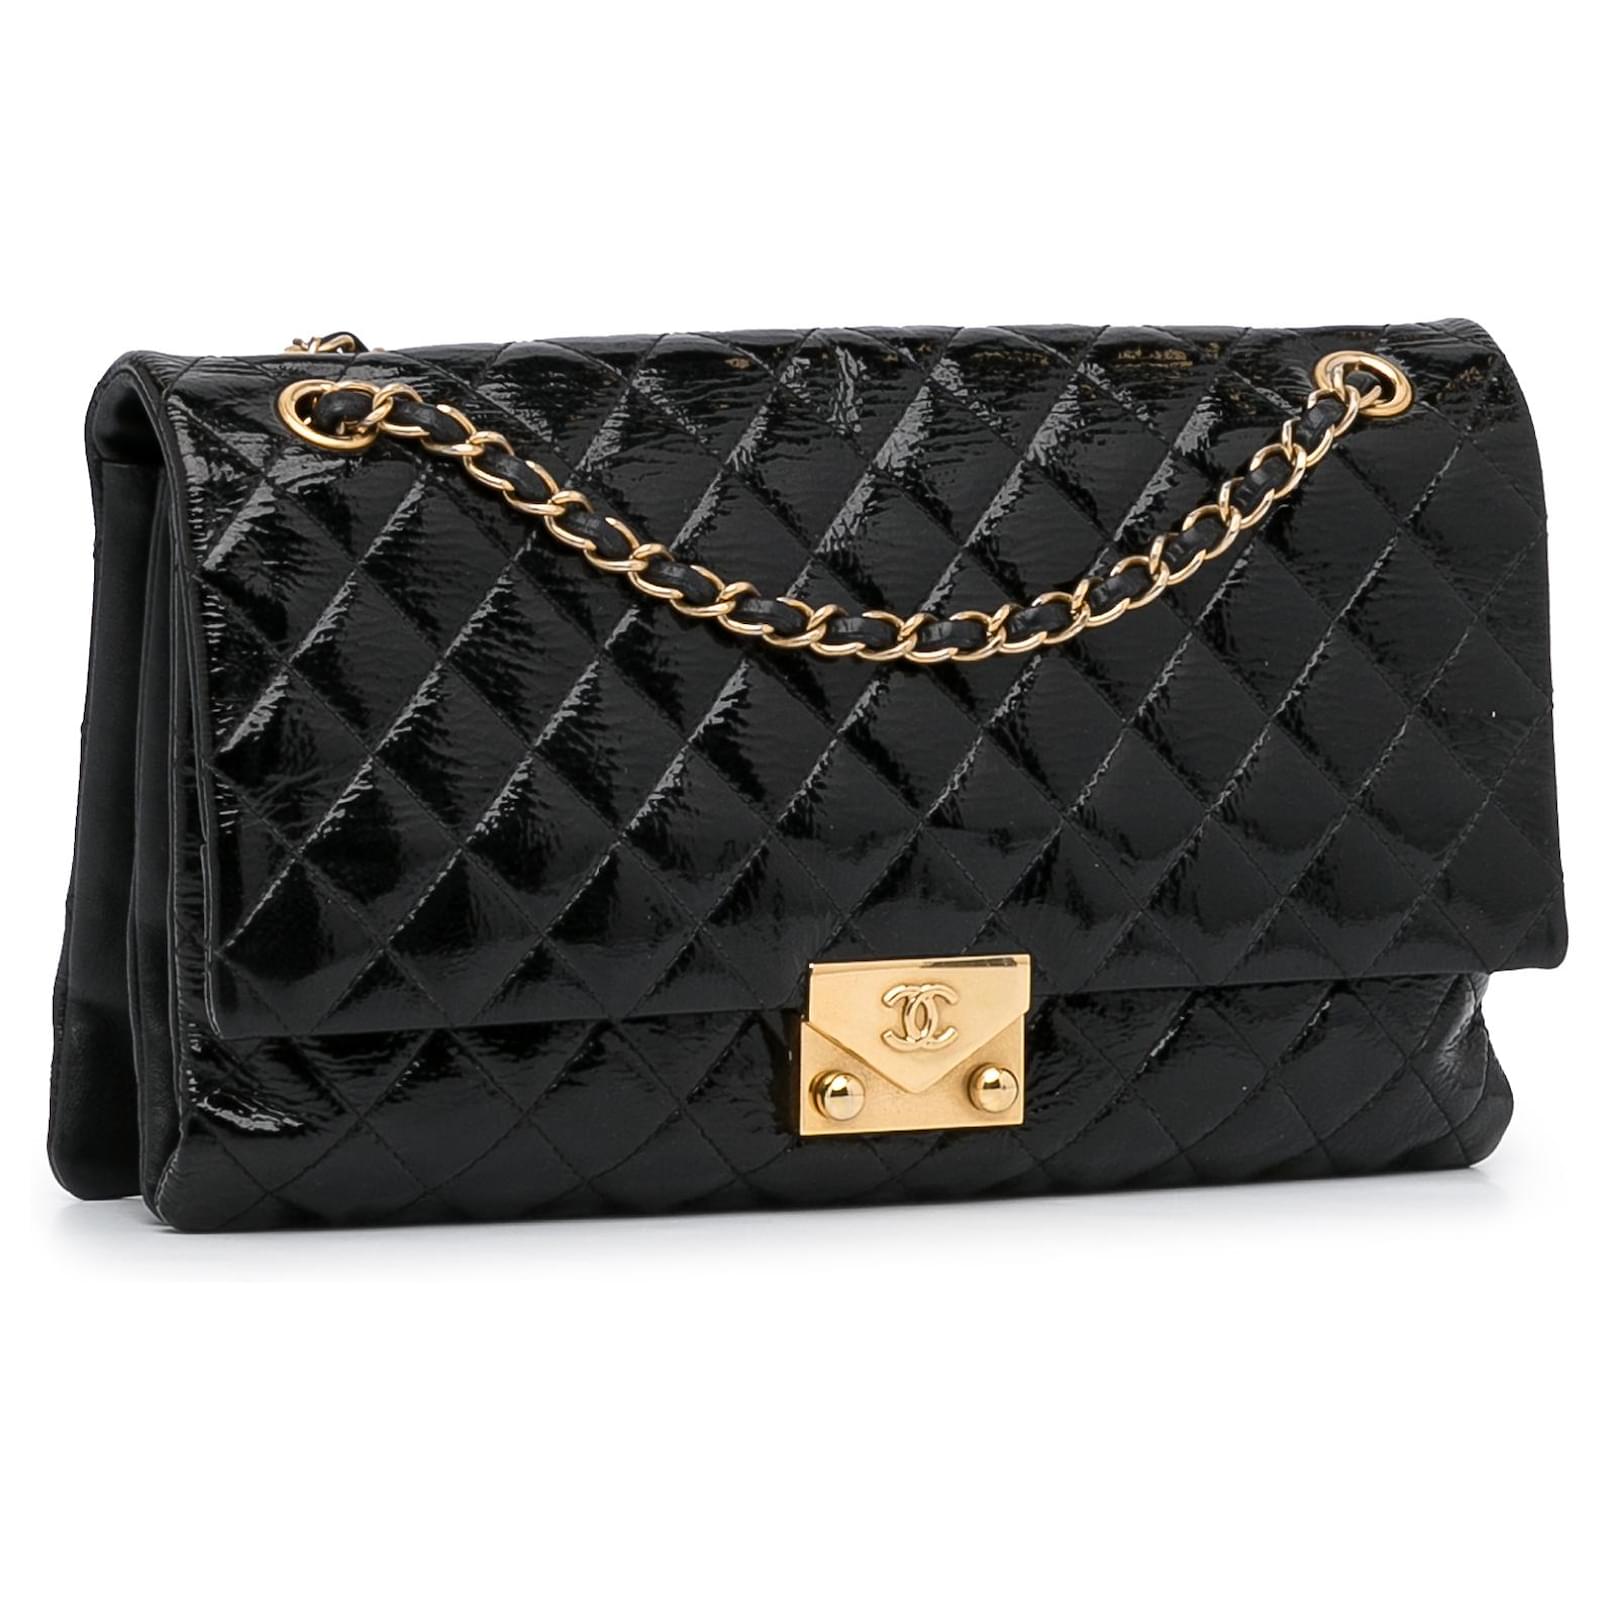 Chanel Black Pagoda Accordion Flap Bag Leather Patent leather ref